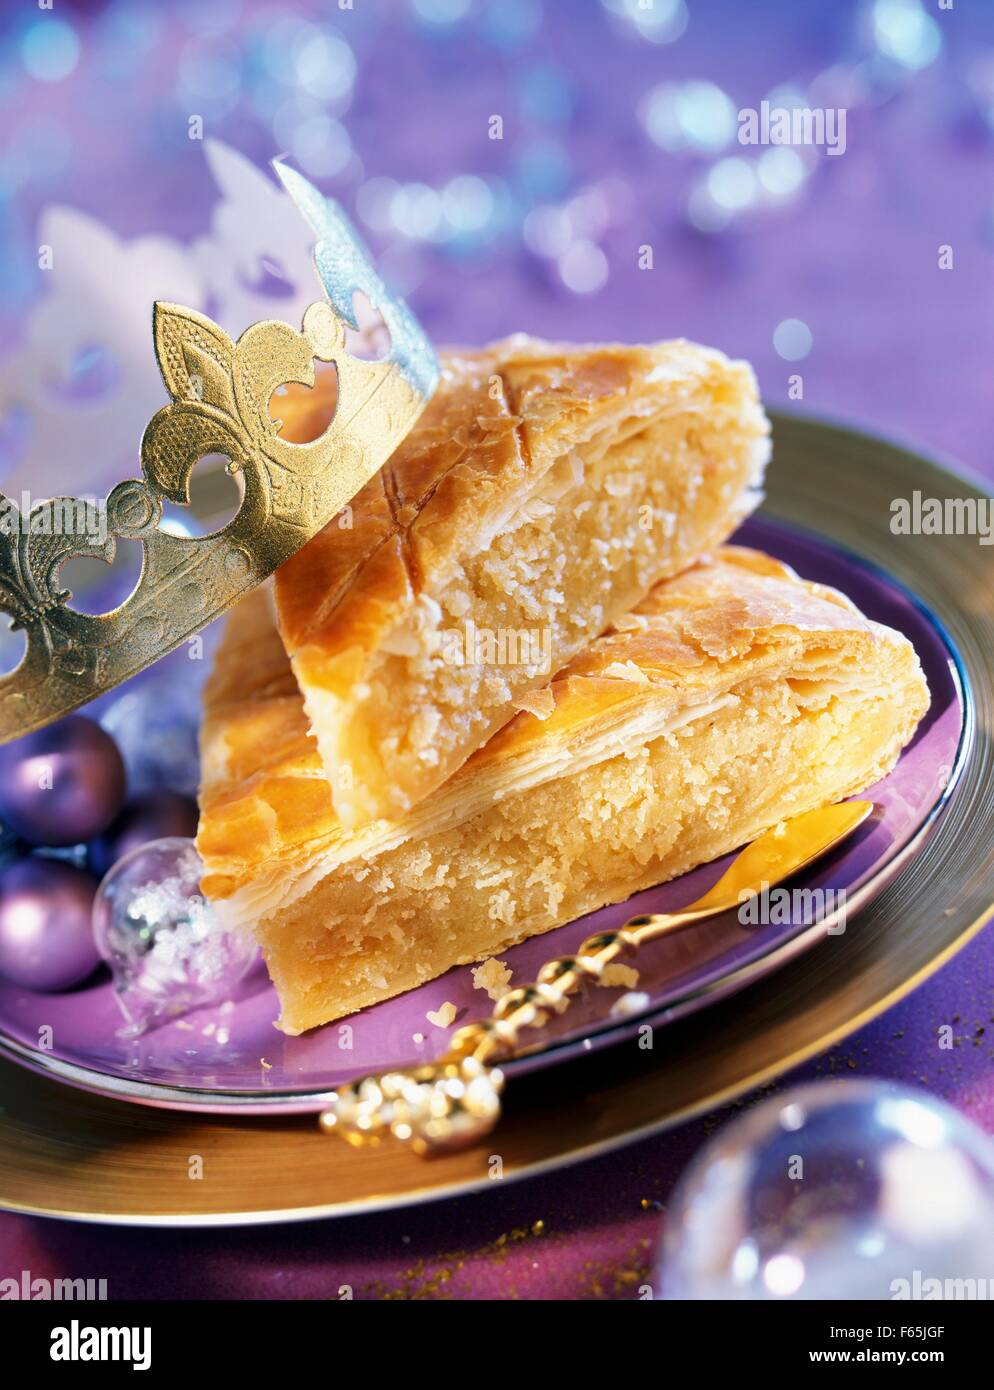 galette des rois flaky pastry and almond cake Stock Photo